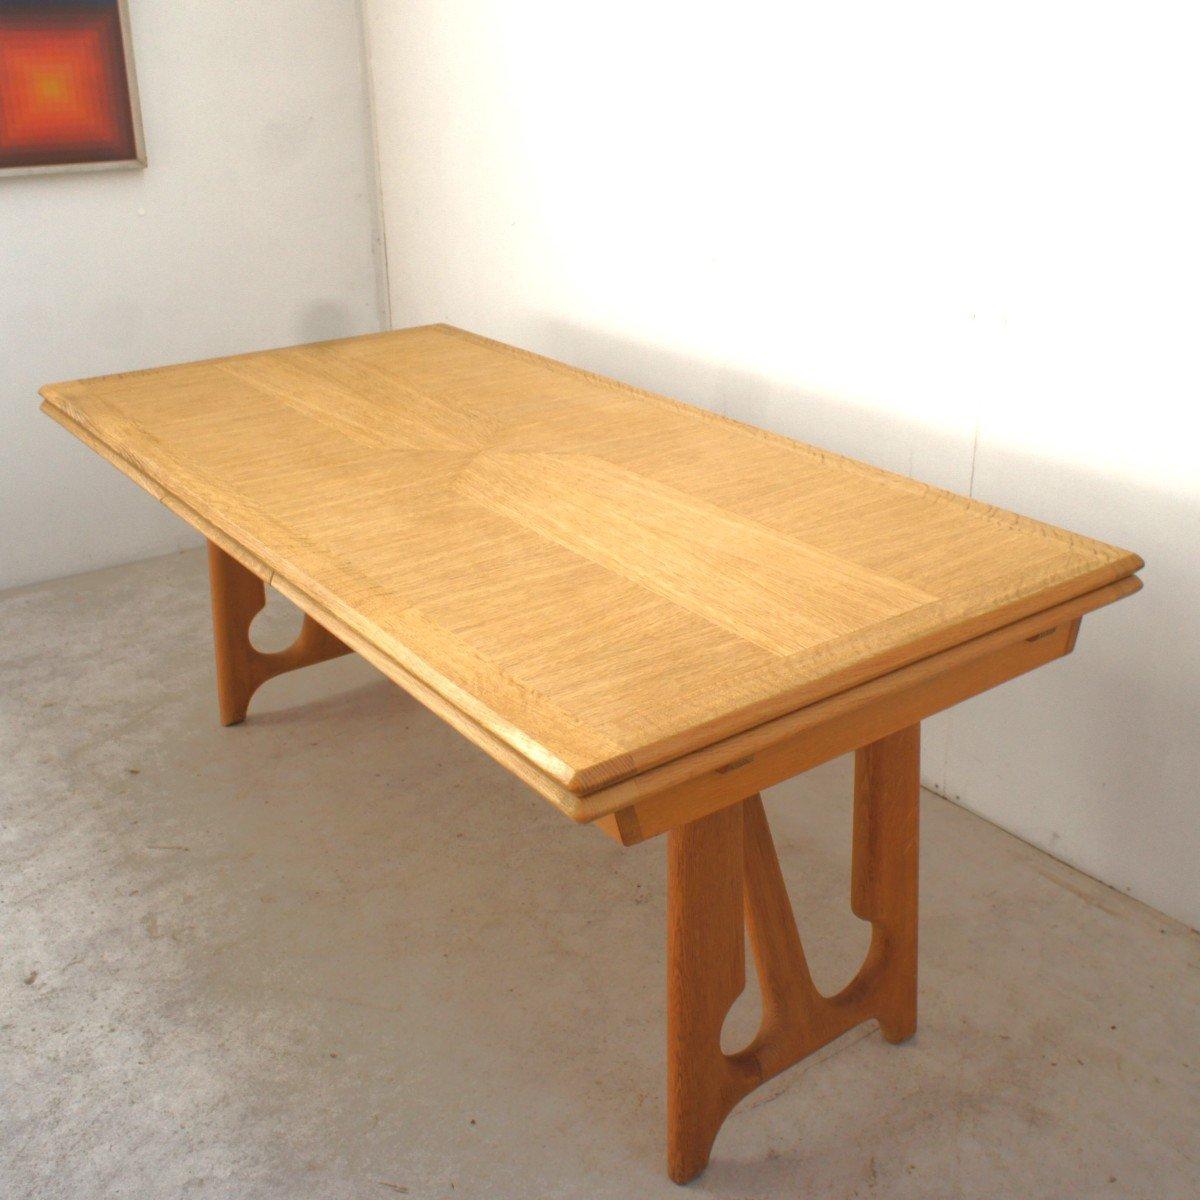 Splendid dining room table in light oak by Guillerme and Chambron for 